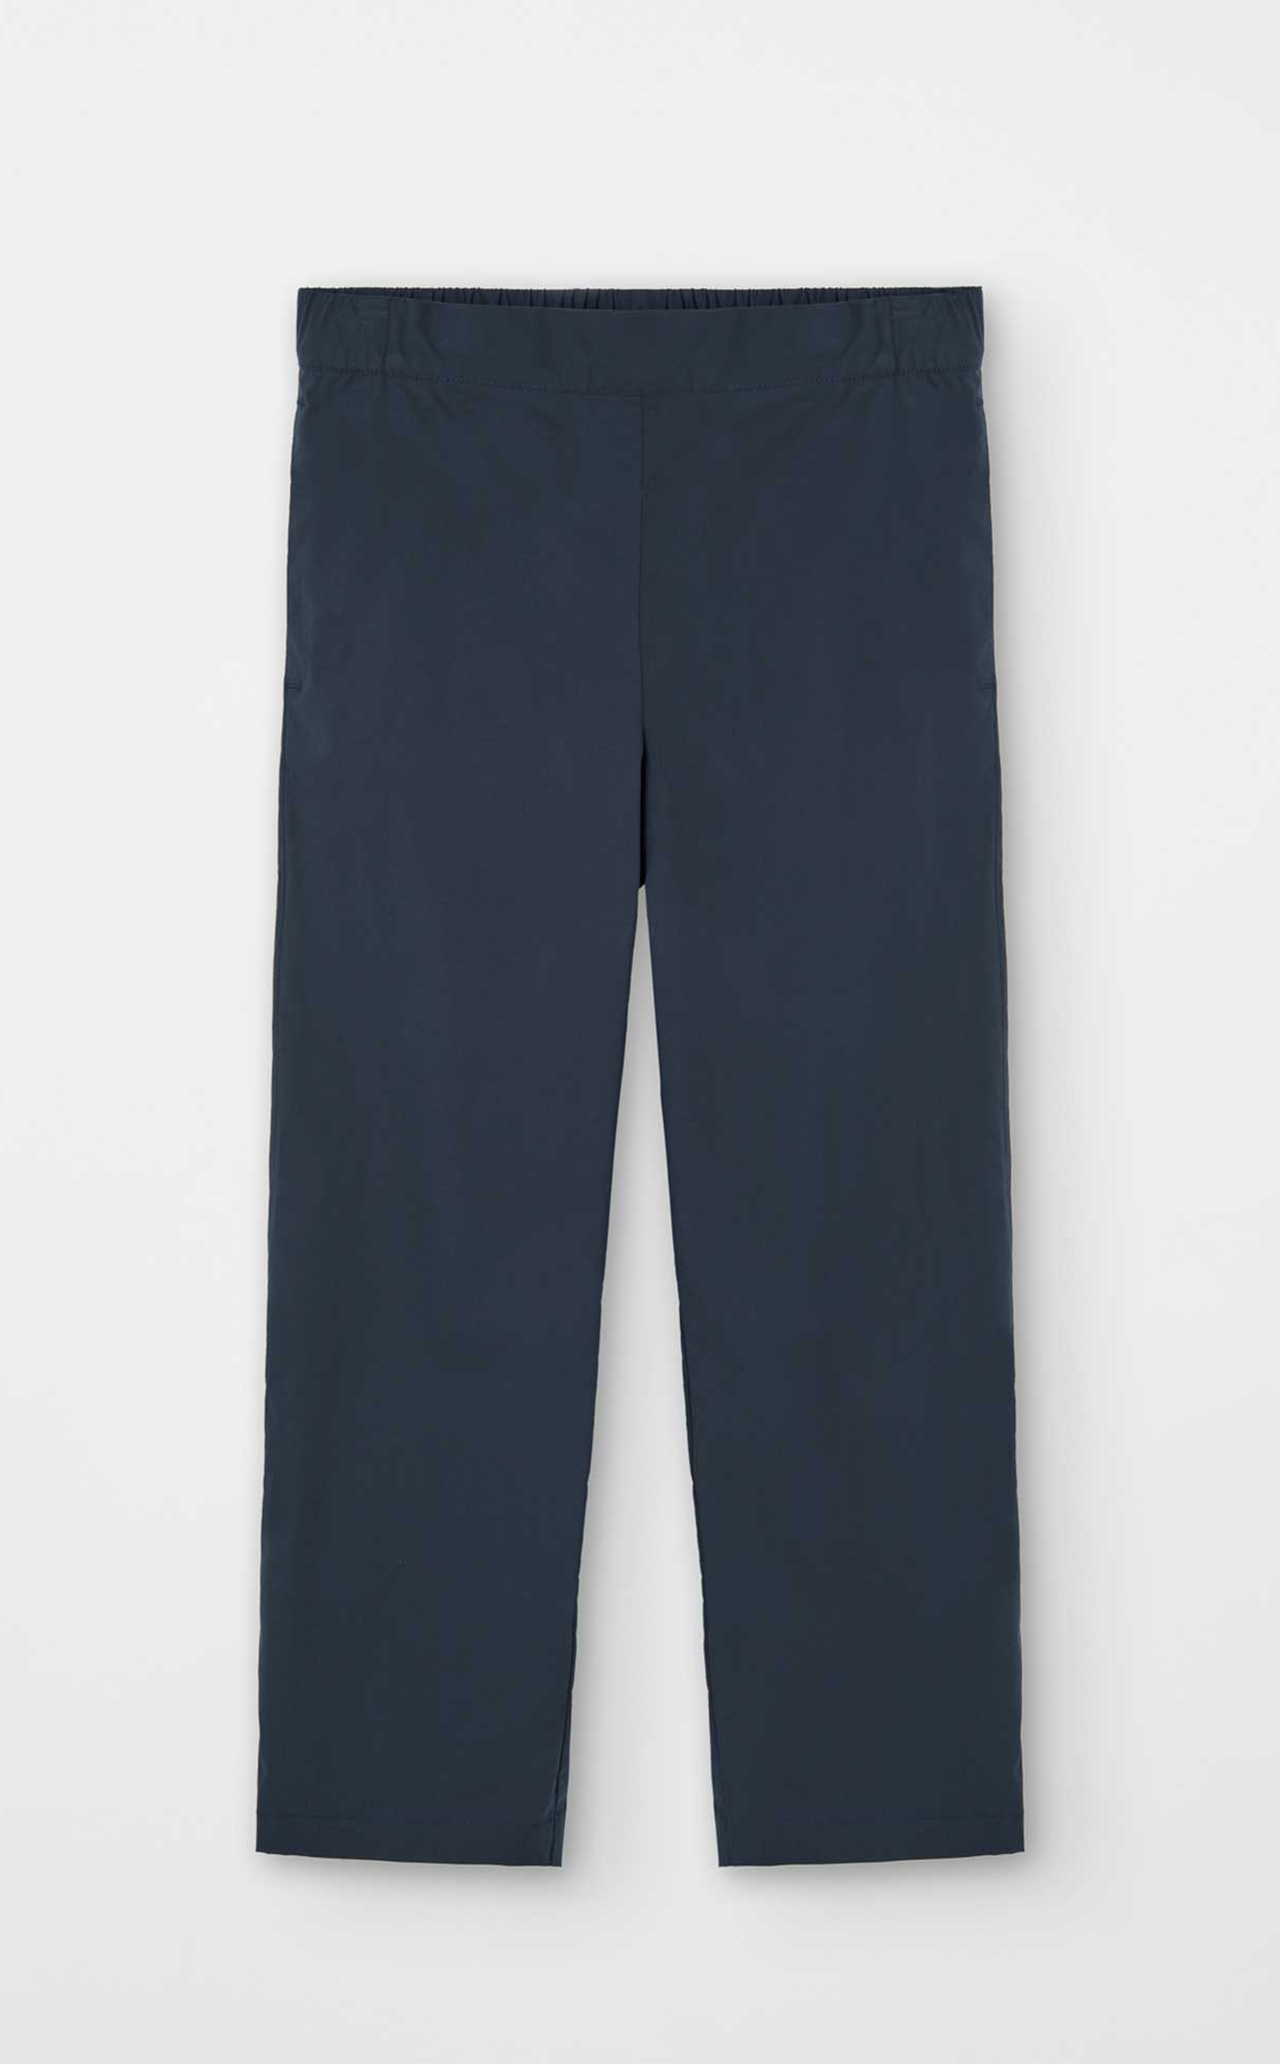 CONFYA TROUSER